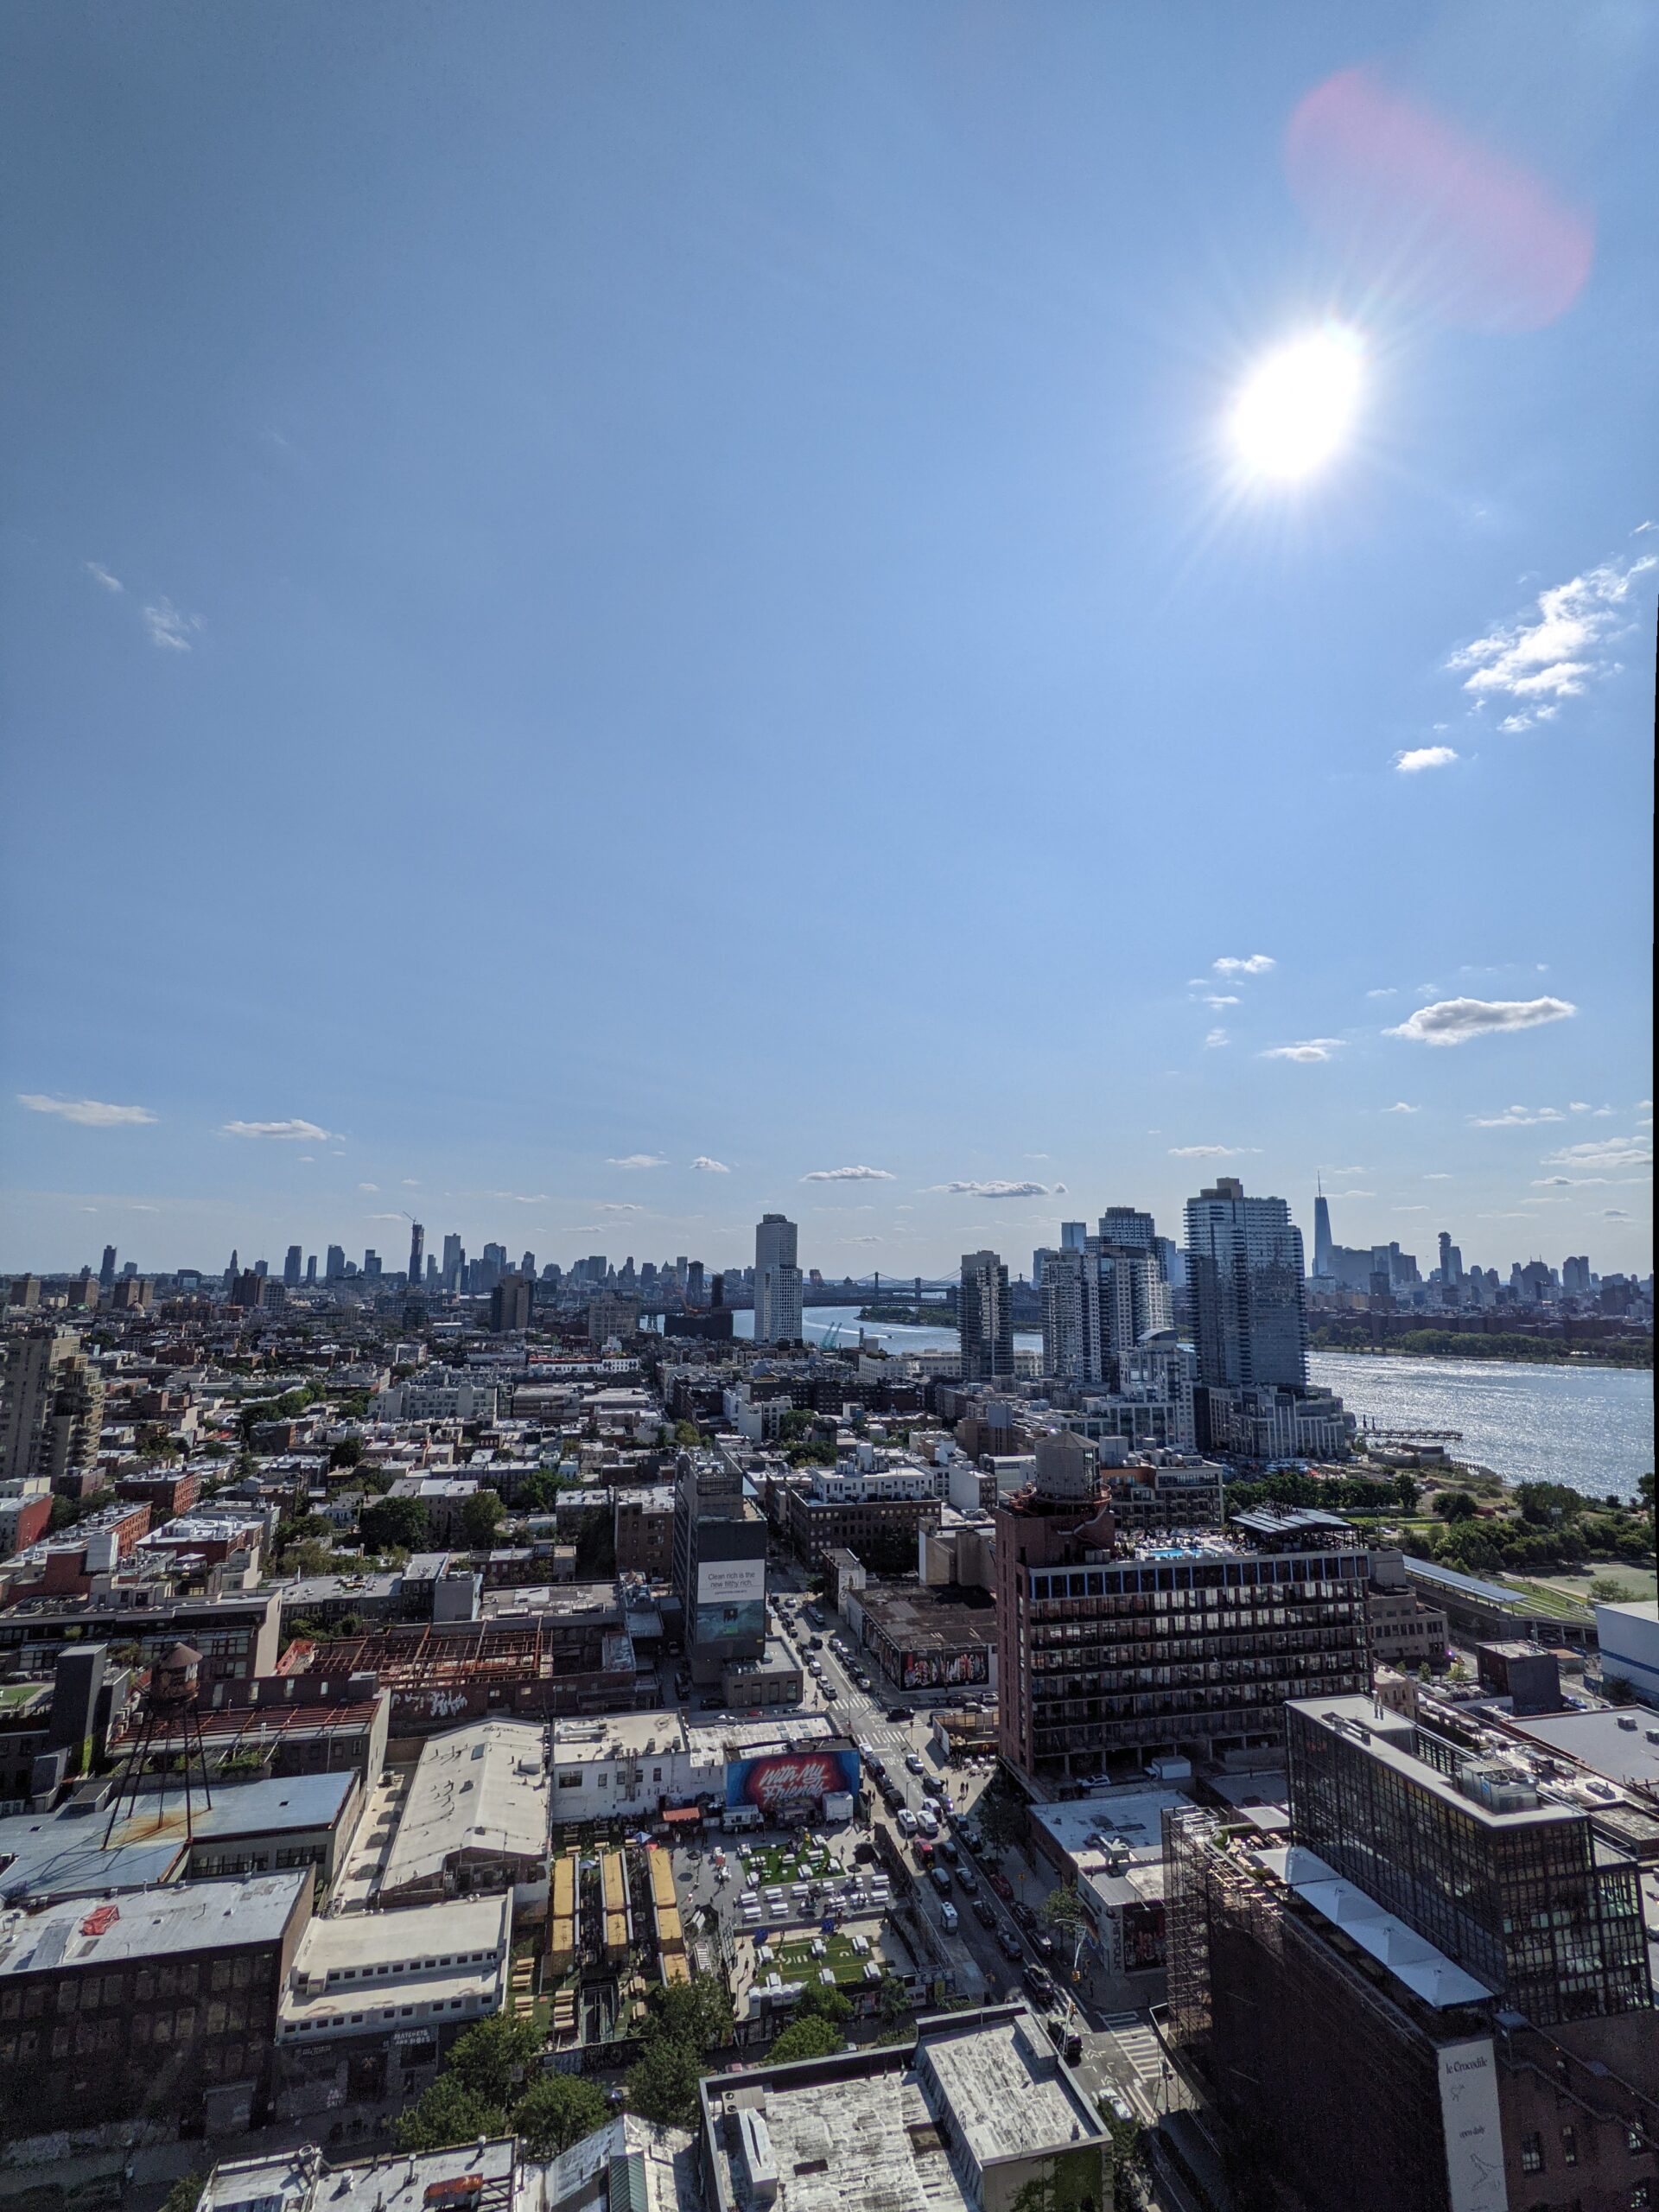 view of northern williamsburg from a high building in bright weather